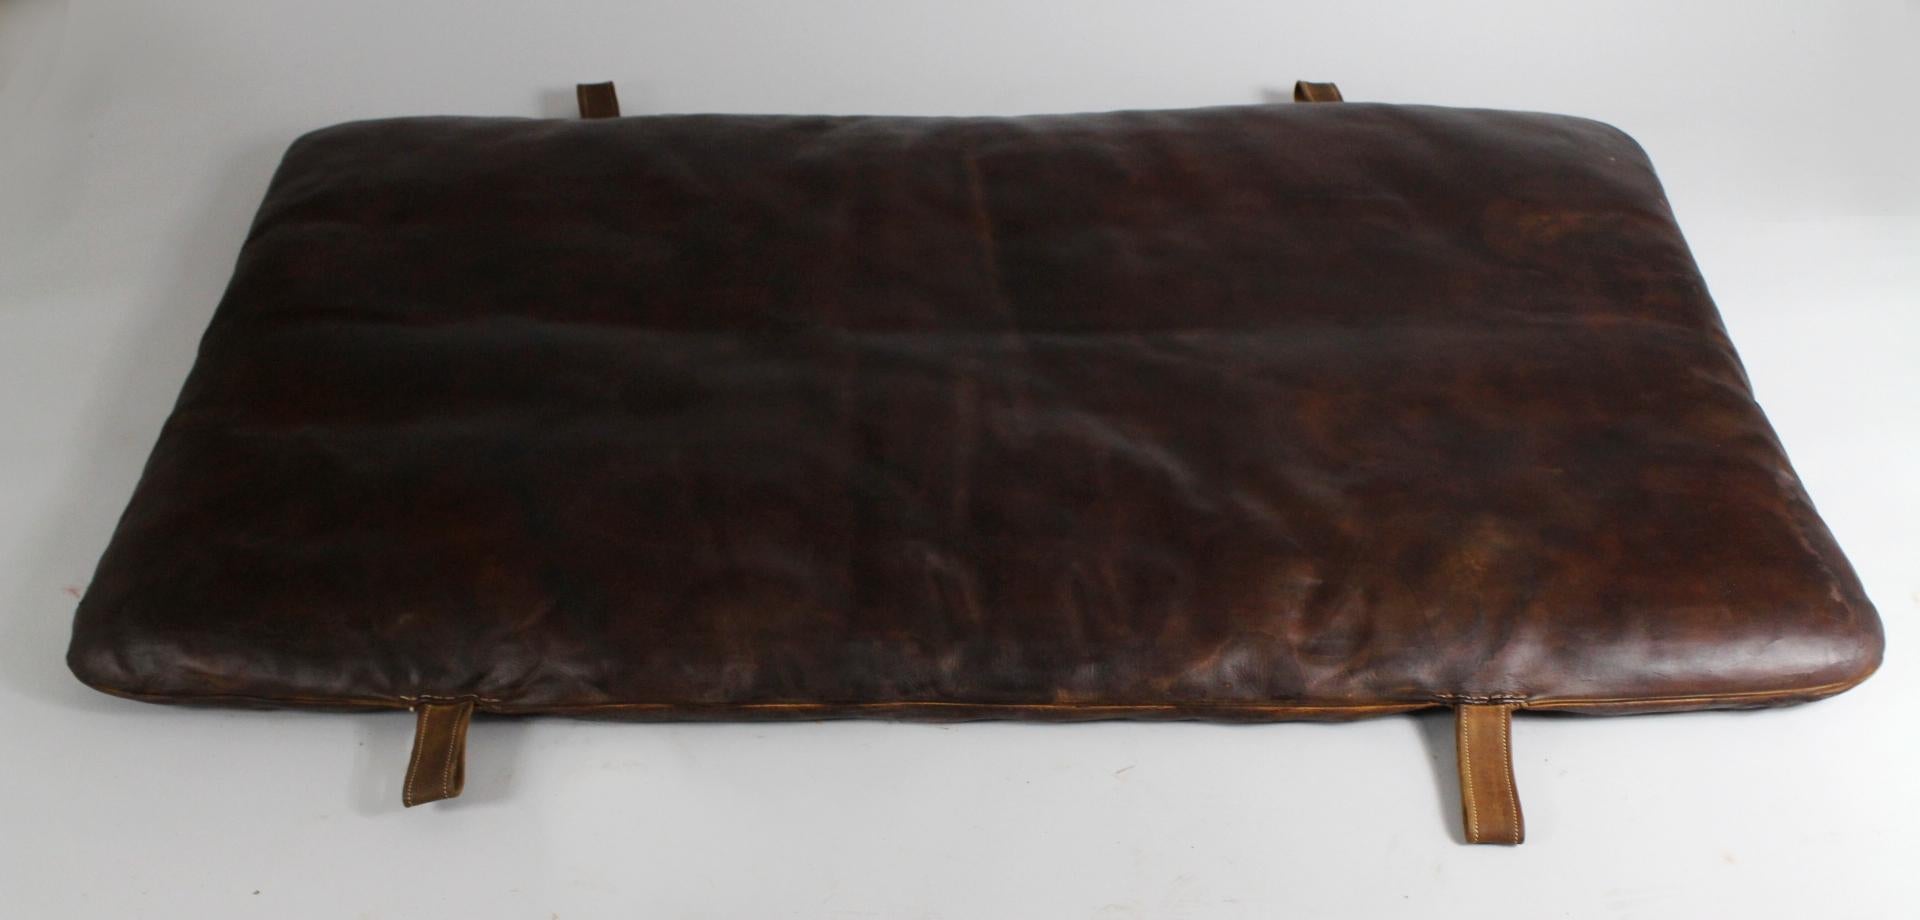 Leather gym mat from the 1930s. It is made from a very thick leather, good condition with patina.